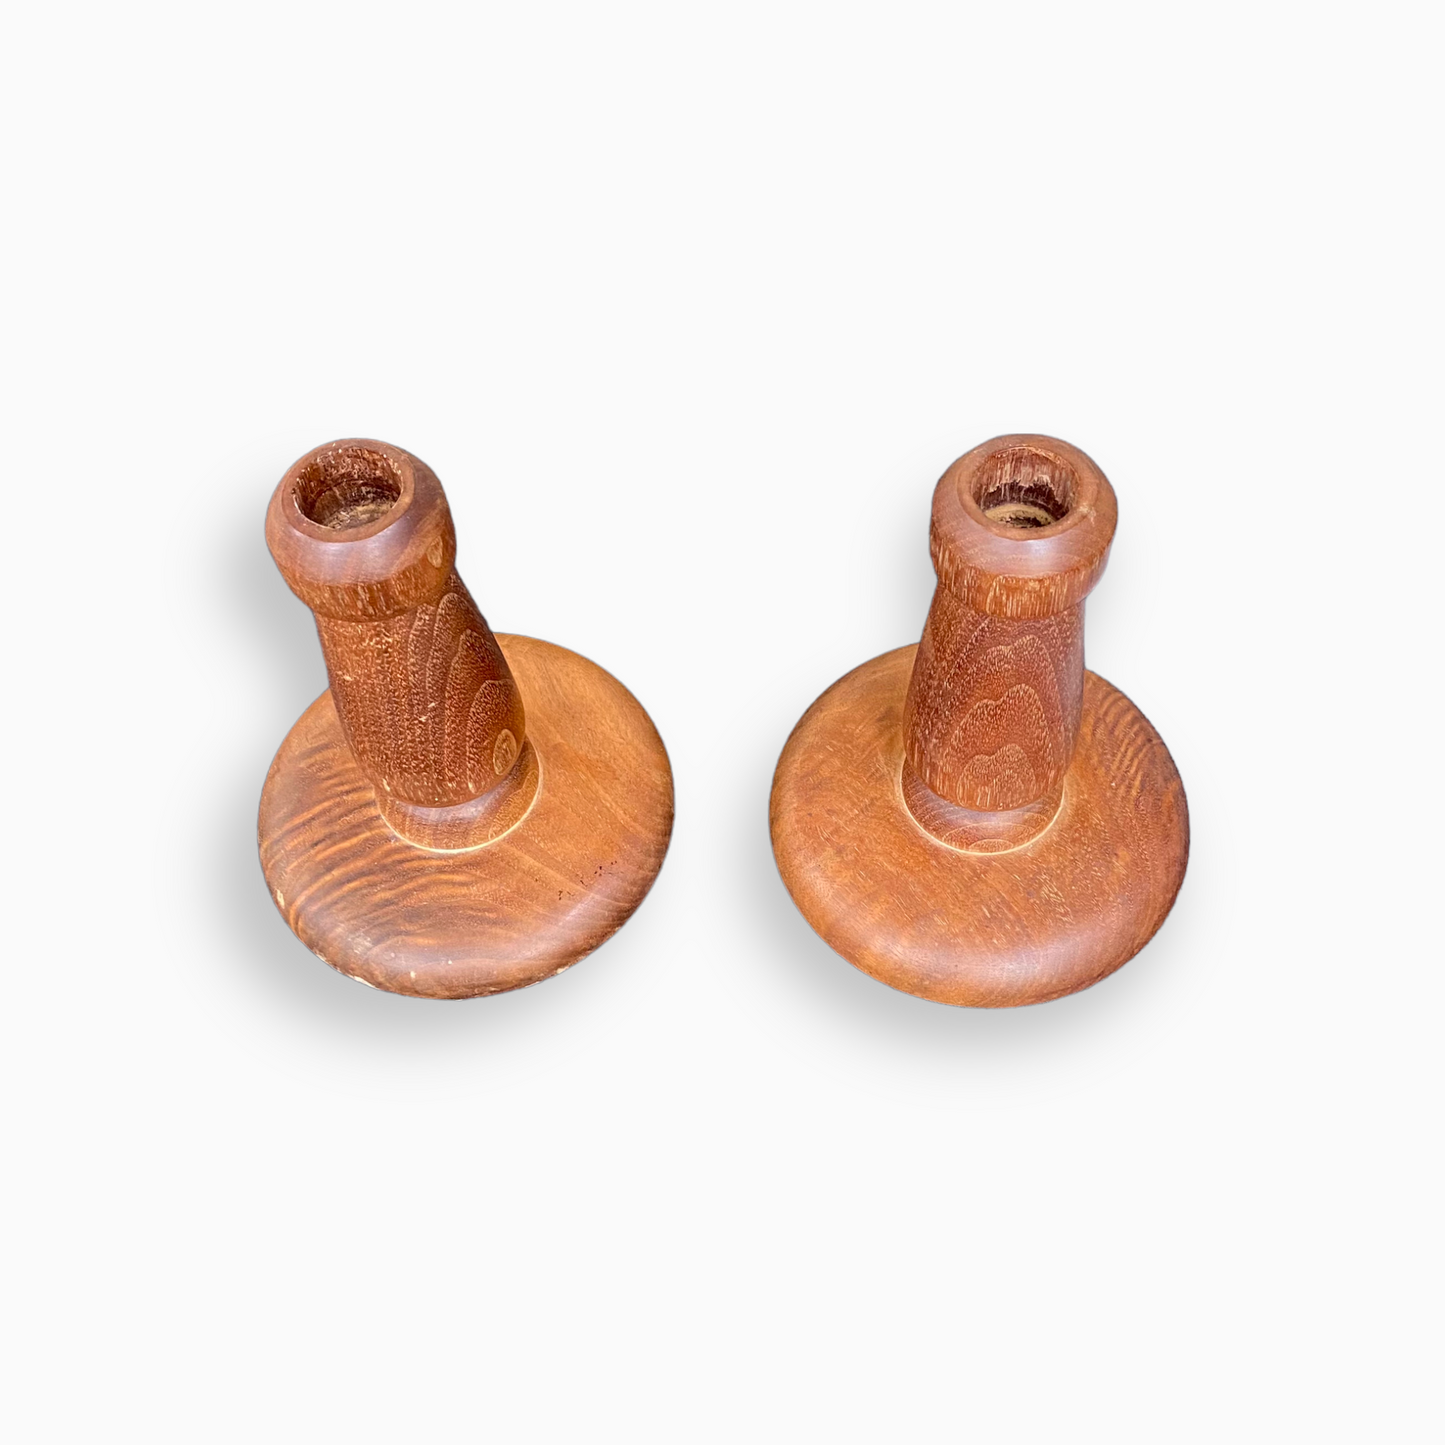 HAND-TURNED WOODEN CANDLESTICKS